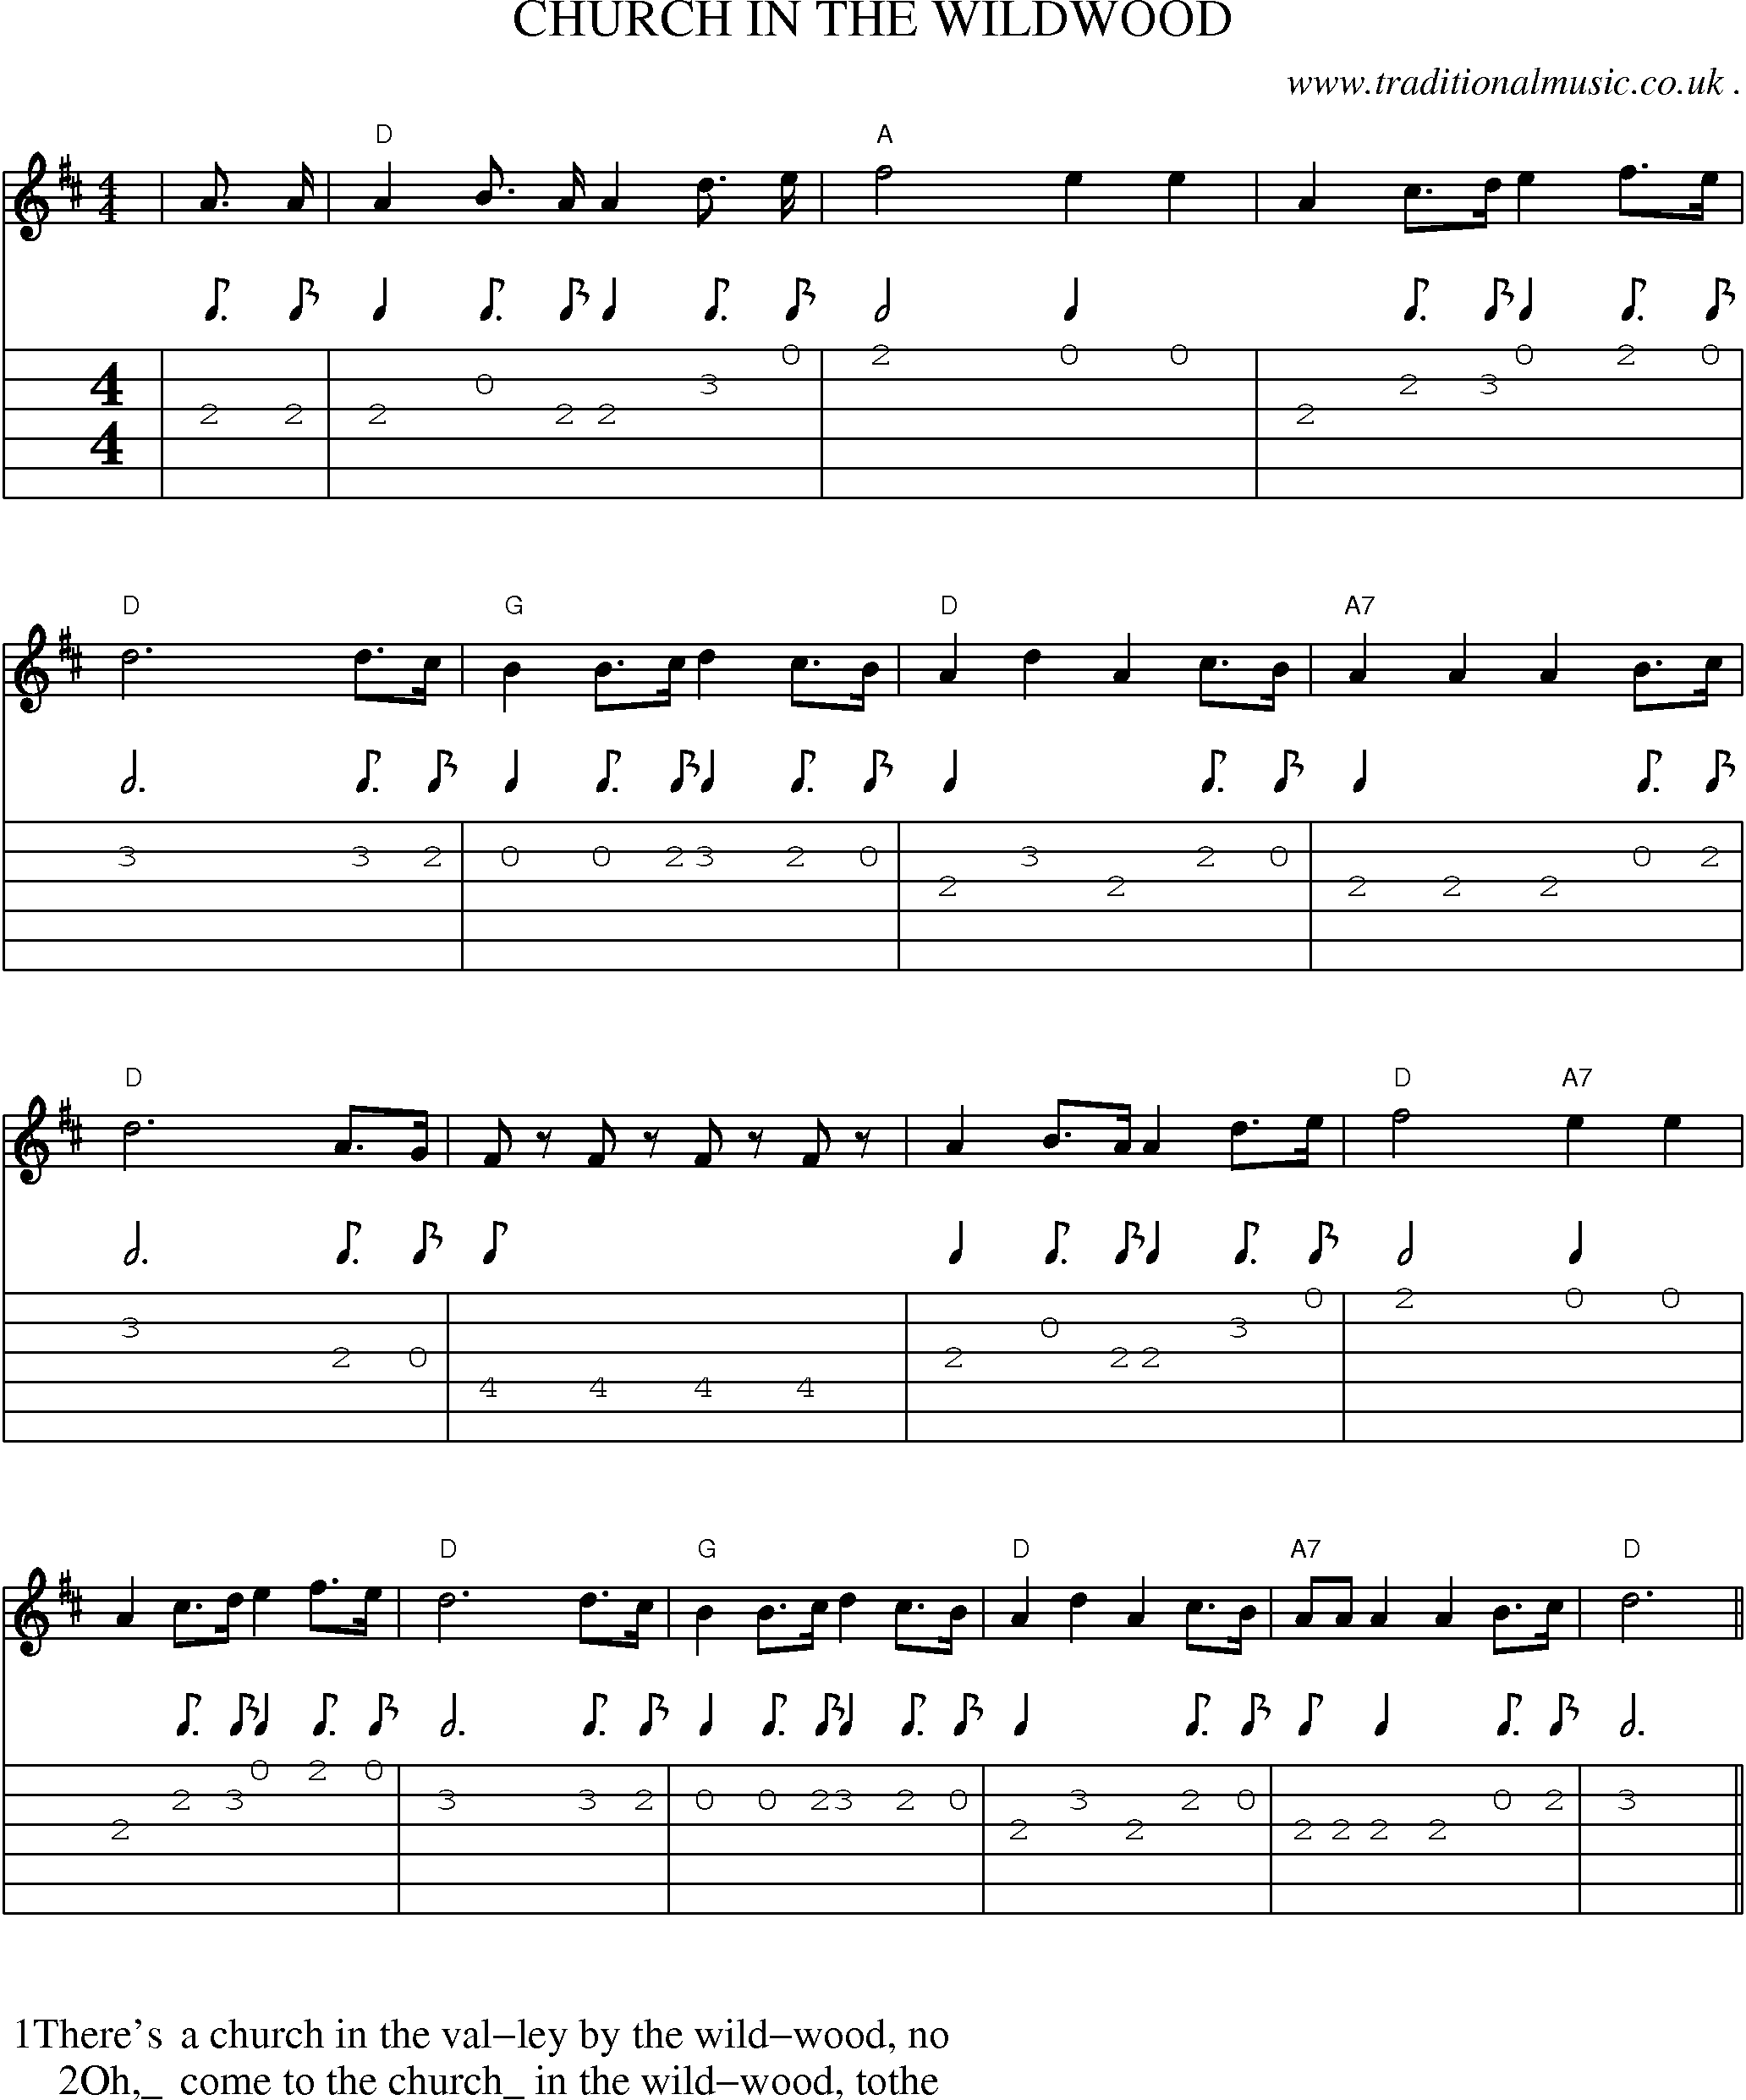 Music Score and Guitar Tabs for Church In The Wildwood